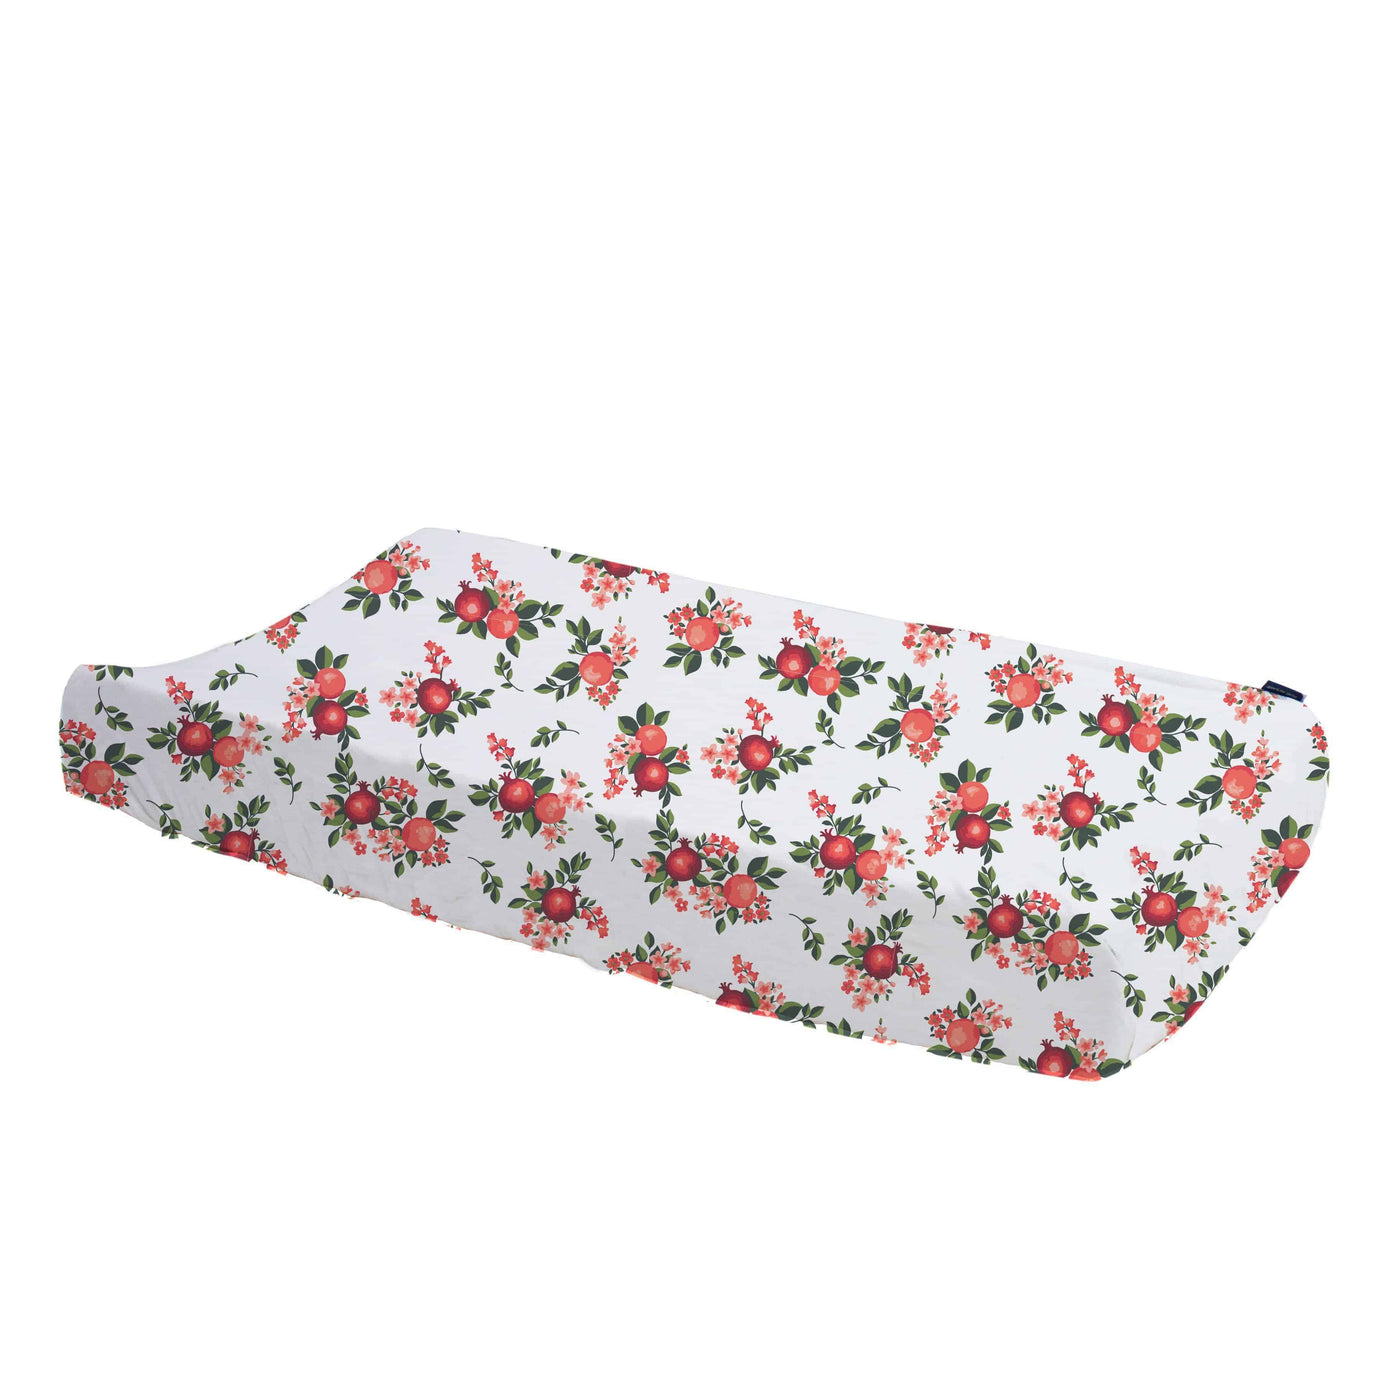 Ojai Changing Pad Cover - Changing Pad Cover - Bebe au Lait